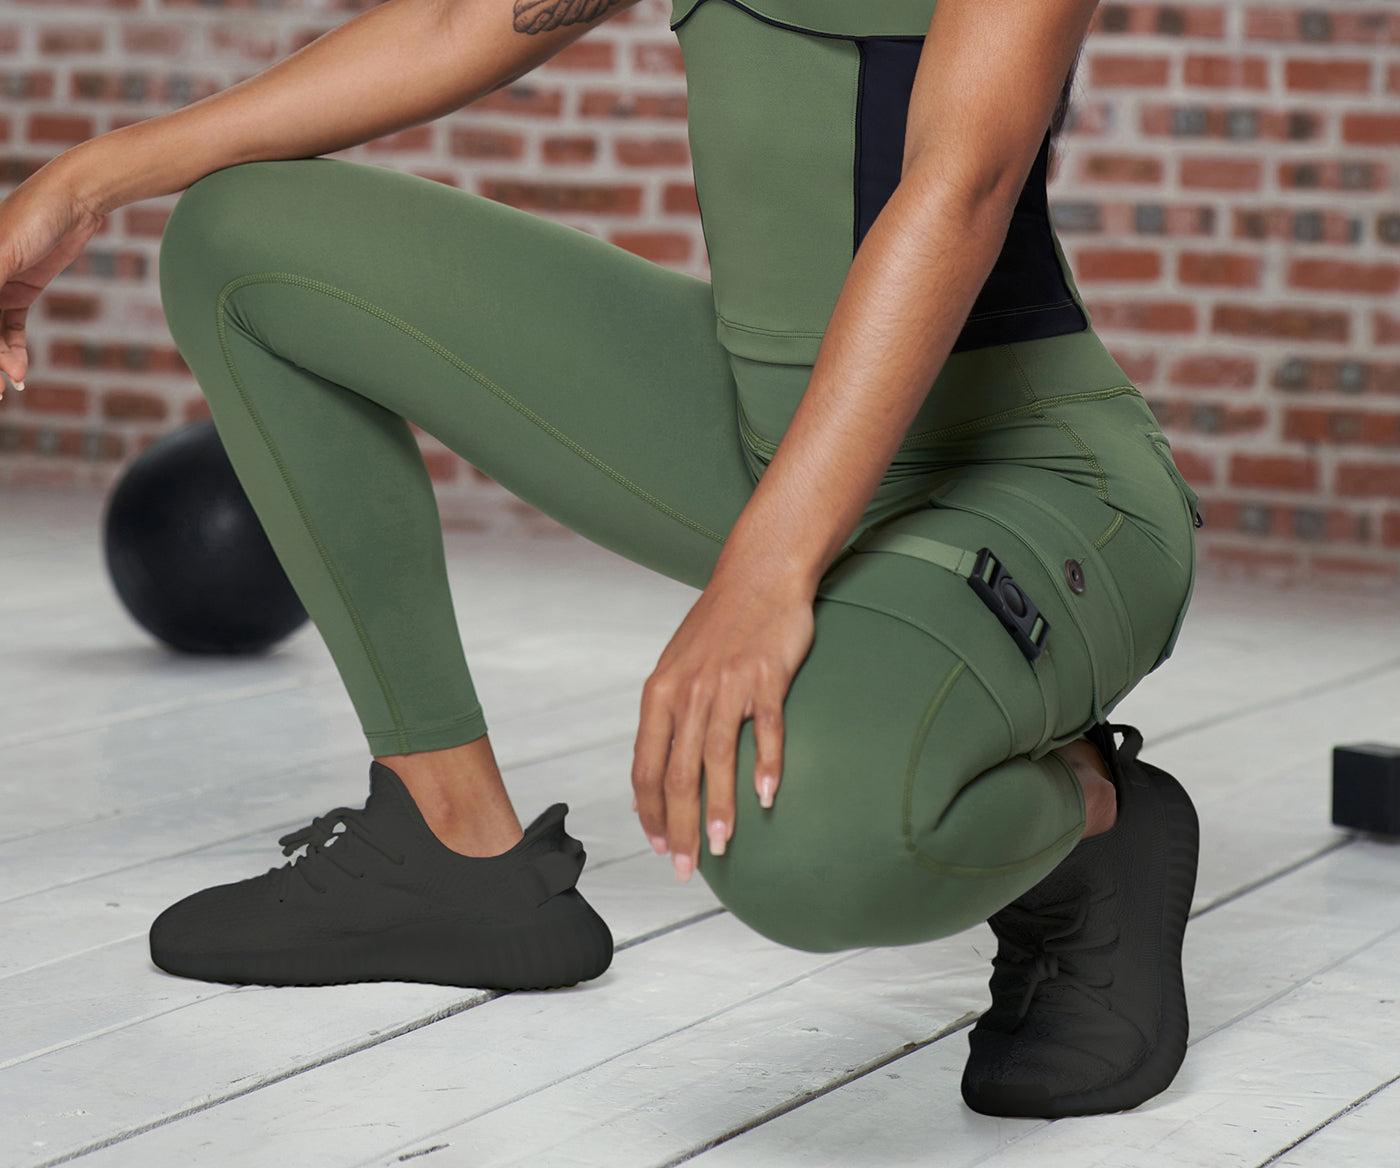 FIRM ABS on X: You can squat down, #FIRMABS protects you. #femalefamily  #loungefamily #loungeunderwear #18weekspregnant #loungelife #myloungelife  #fitfam #fitstagram #momfit #fitmom #fitnesspregnancy #babesquad  #fitnessbabes #loungewear #fitandhappy